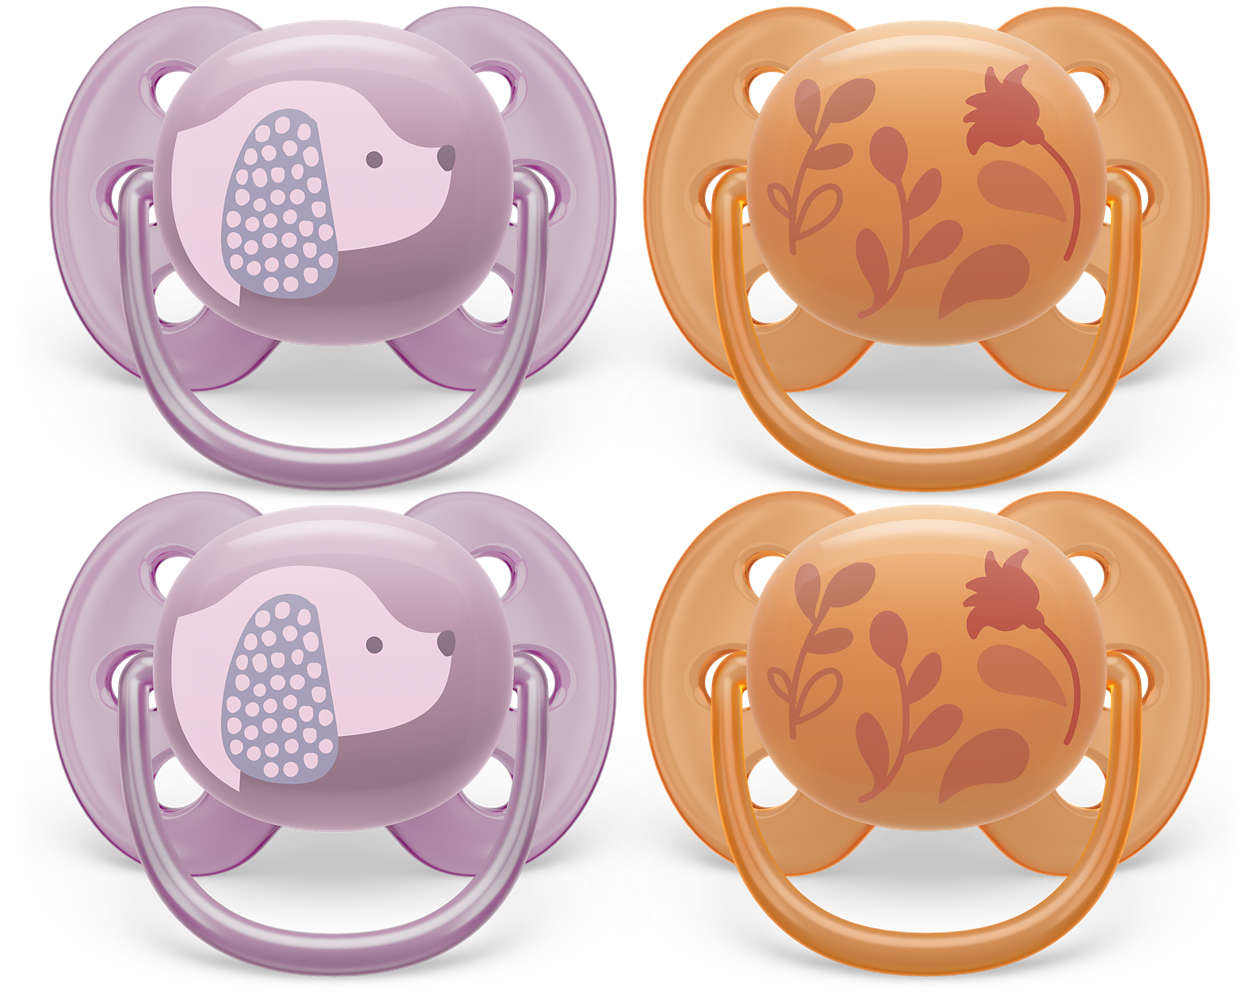 Our softest soother for your baby’s sensitive skin